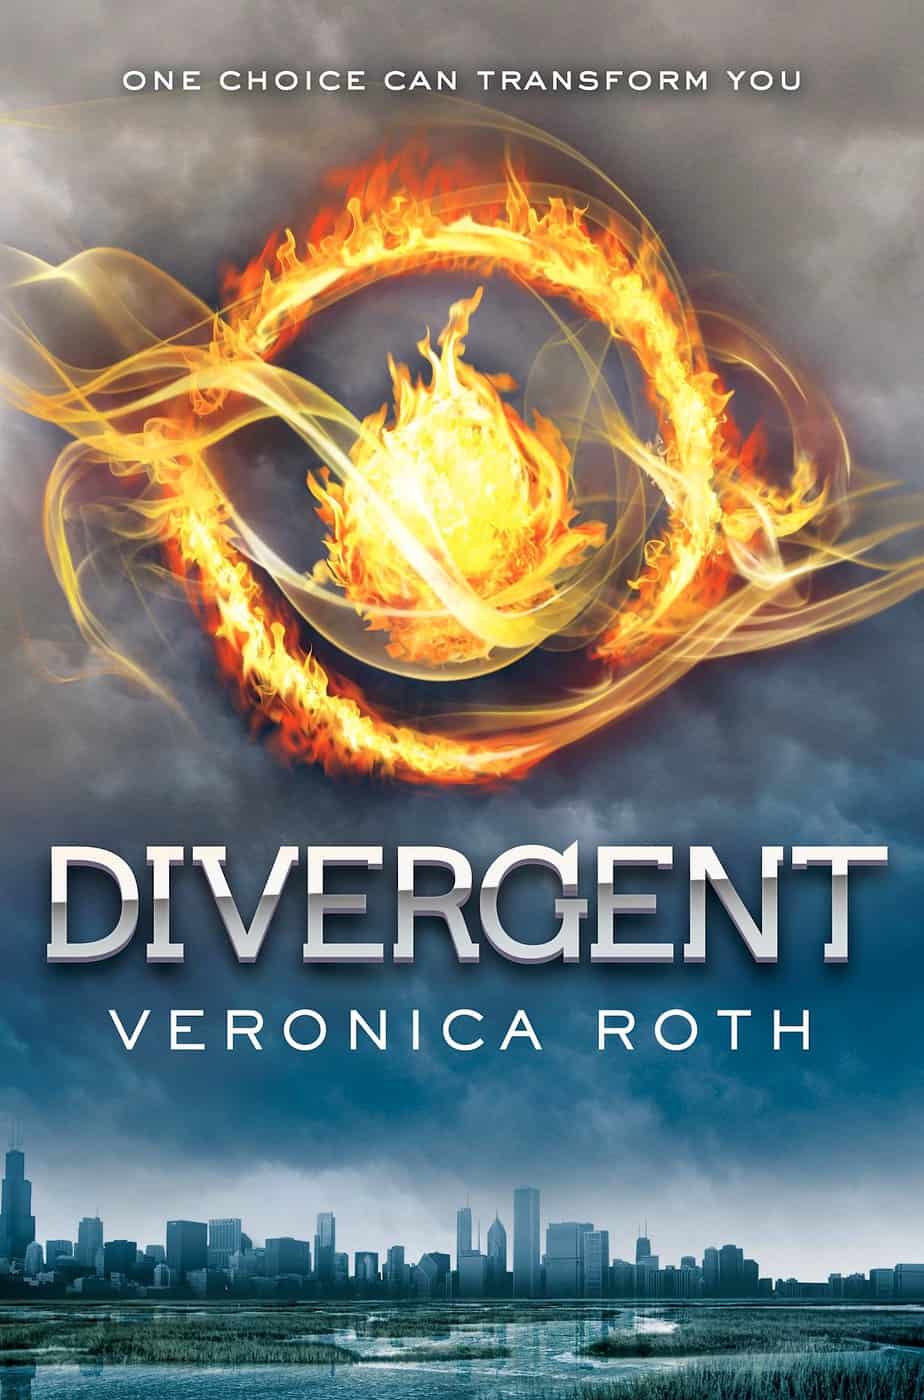 Divergent by Veronica Roth book cover One choice can transform you